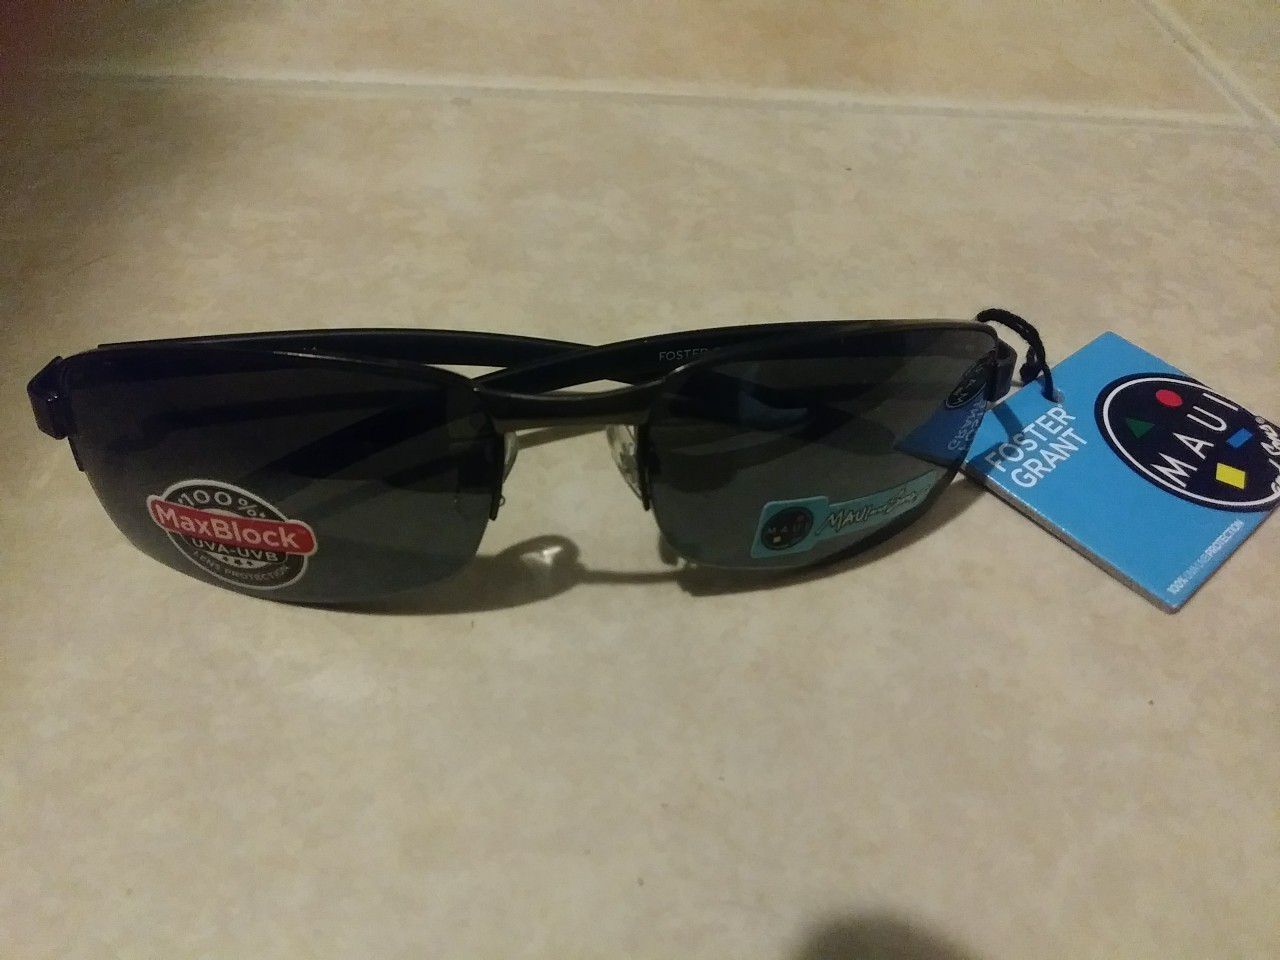 Foster Grant Maui sunglasses new with tags